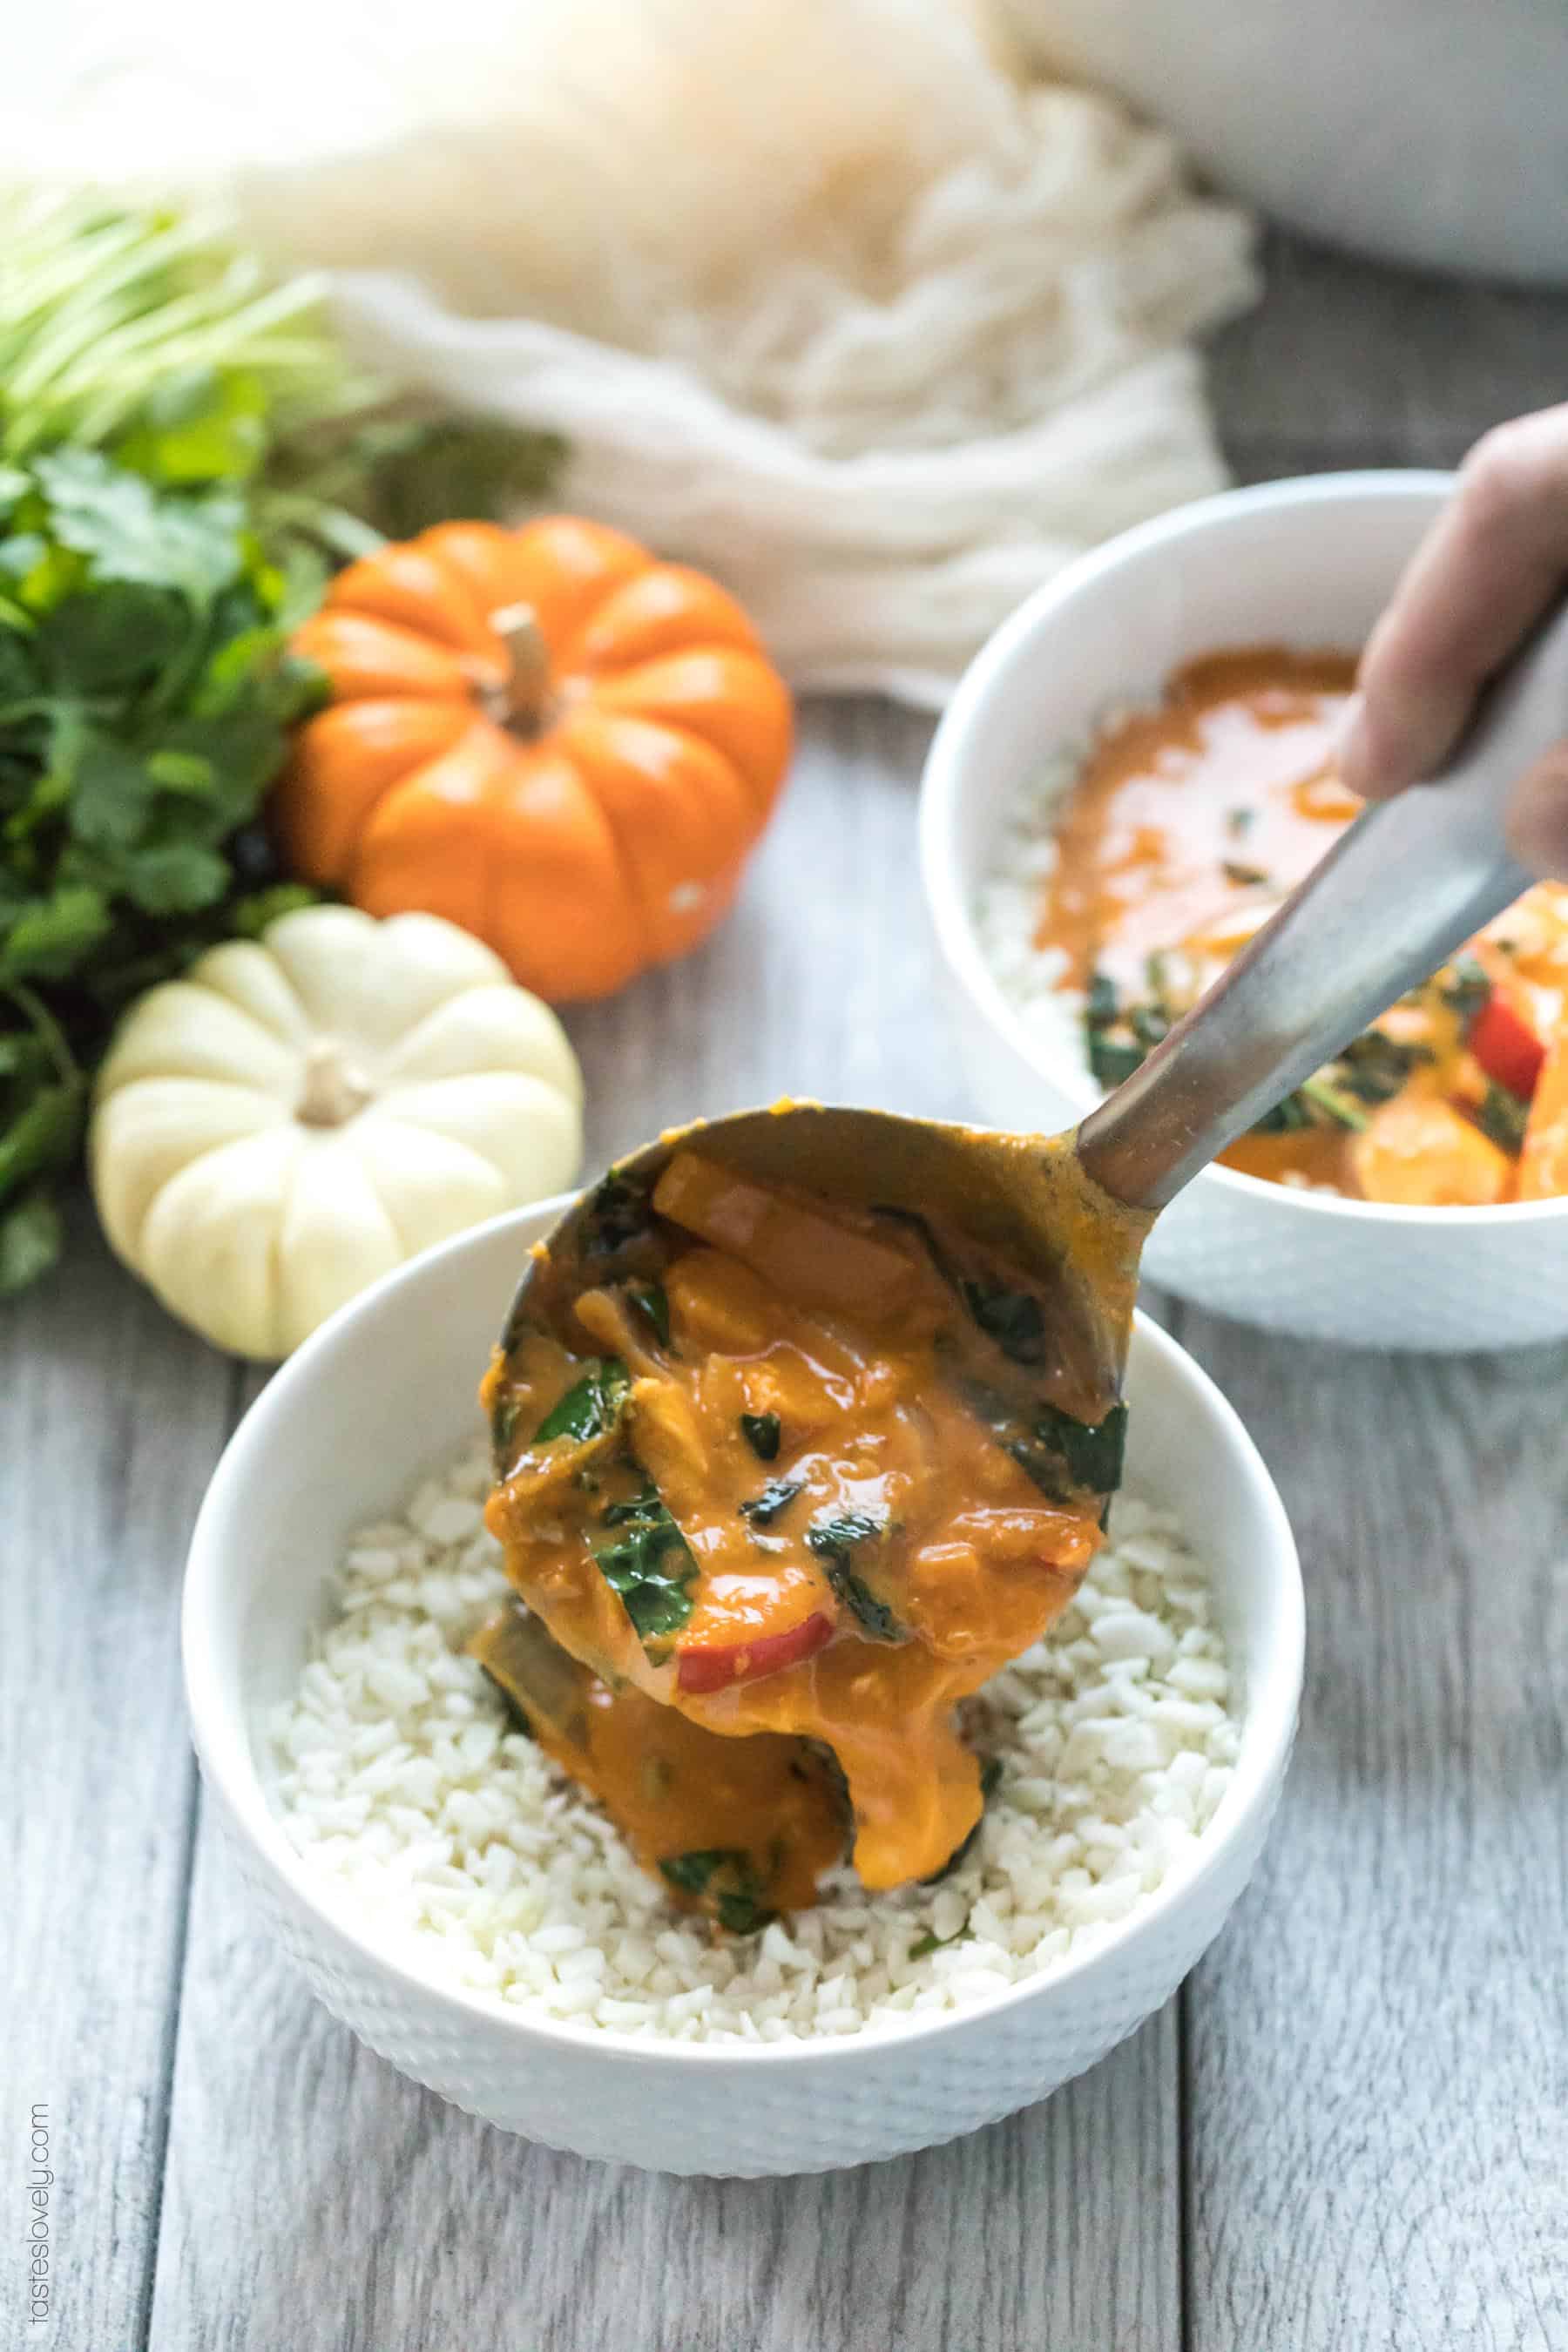 Paleo & Whole30 Pumpkin Coconut Thai Curry - a flavorful and healthy dinner recipe! Gluten free, grain free, dairy free, sugar free, clean eating